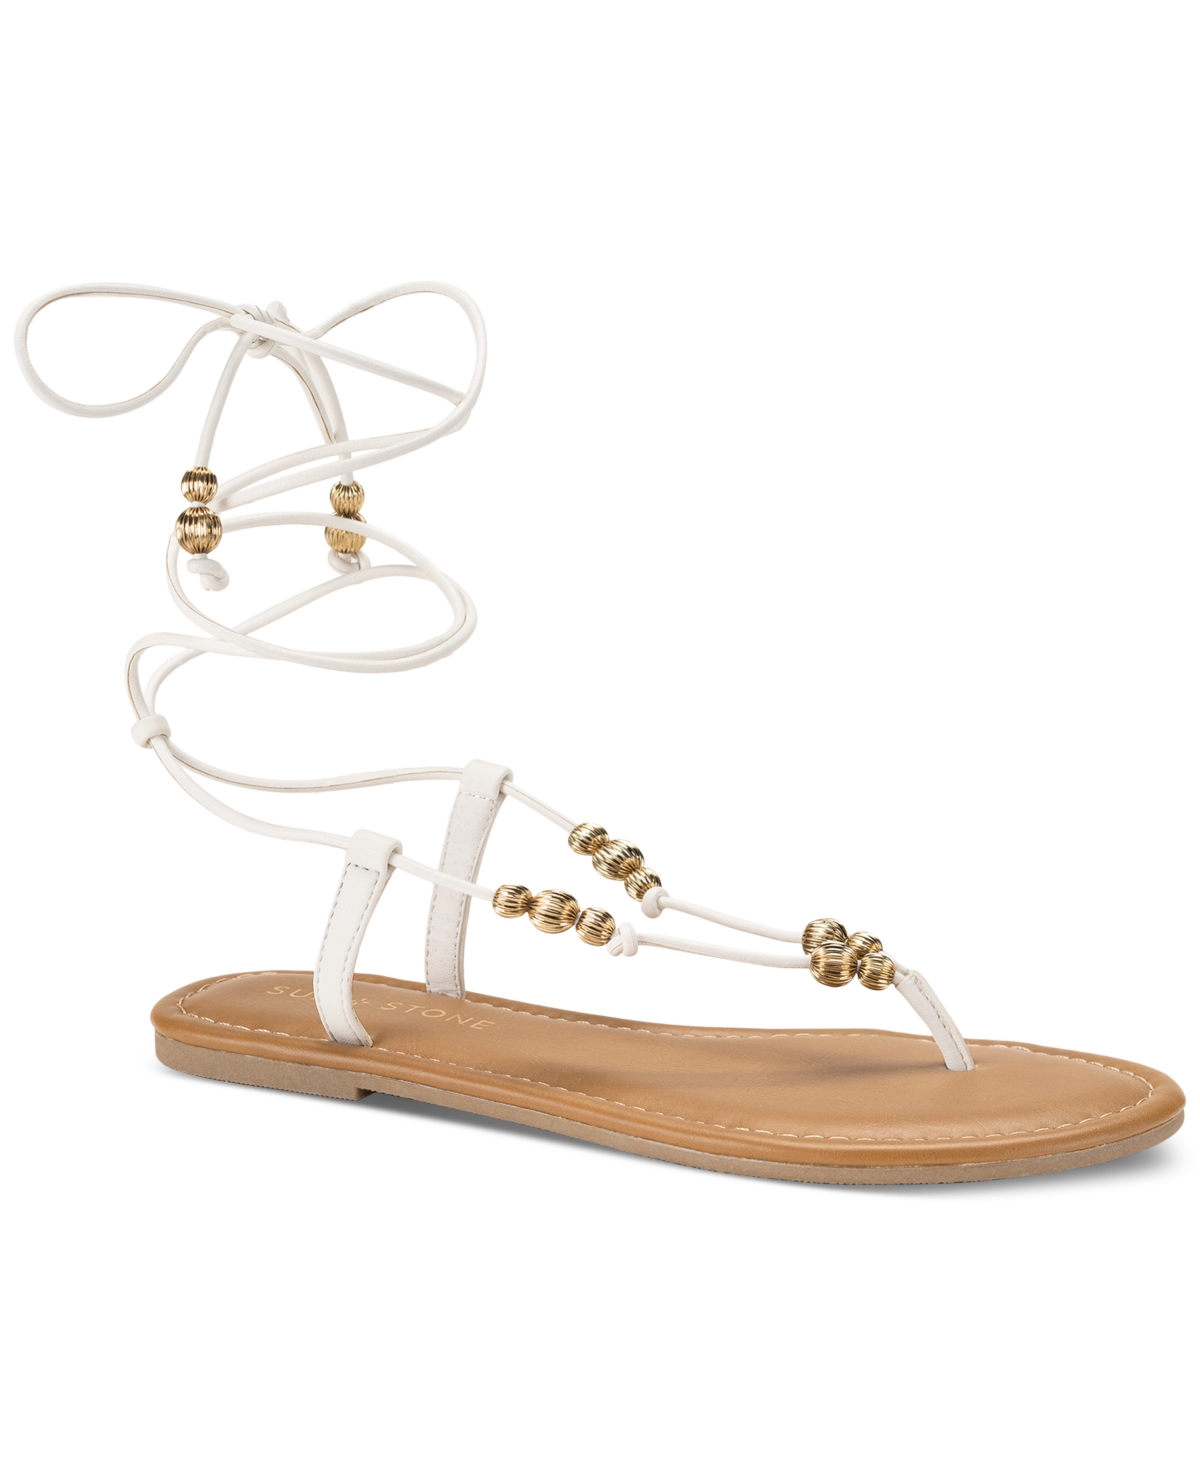 Ramseyy Lace-Up Sandals, Created for Macy's - Sunset